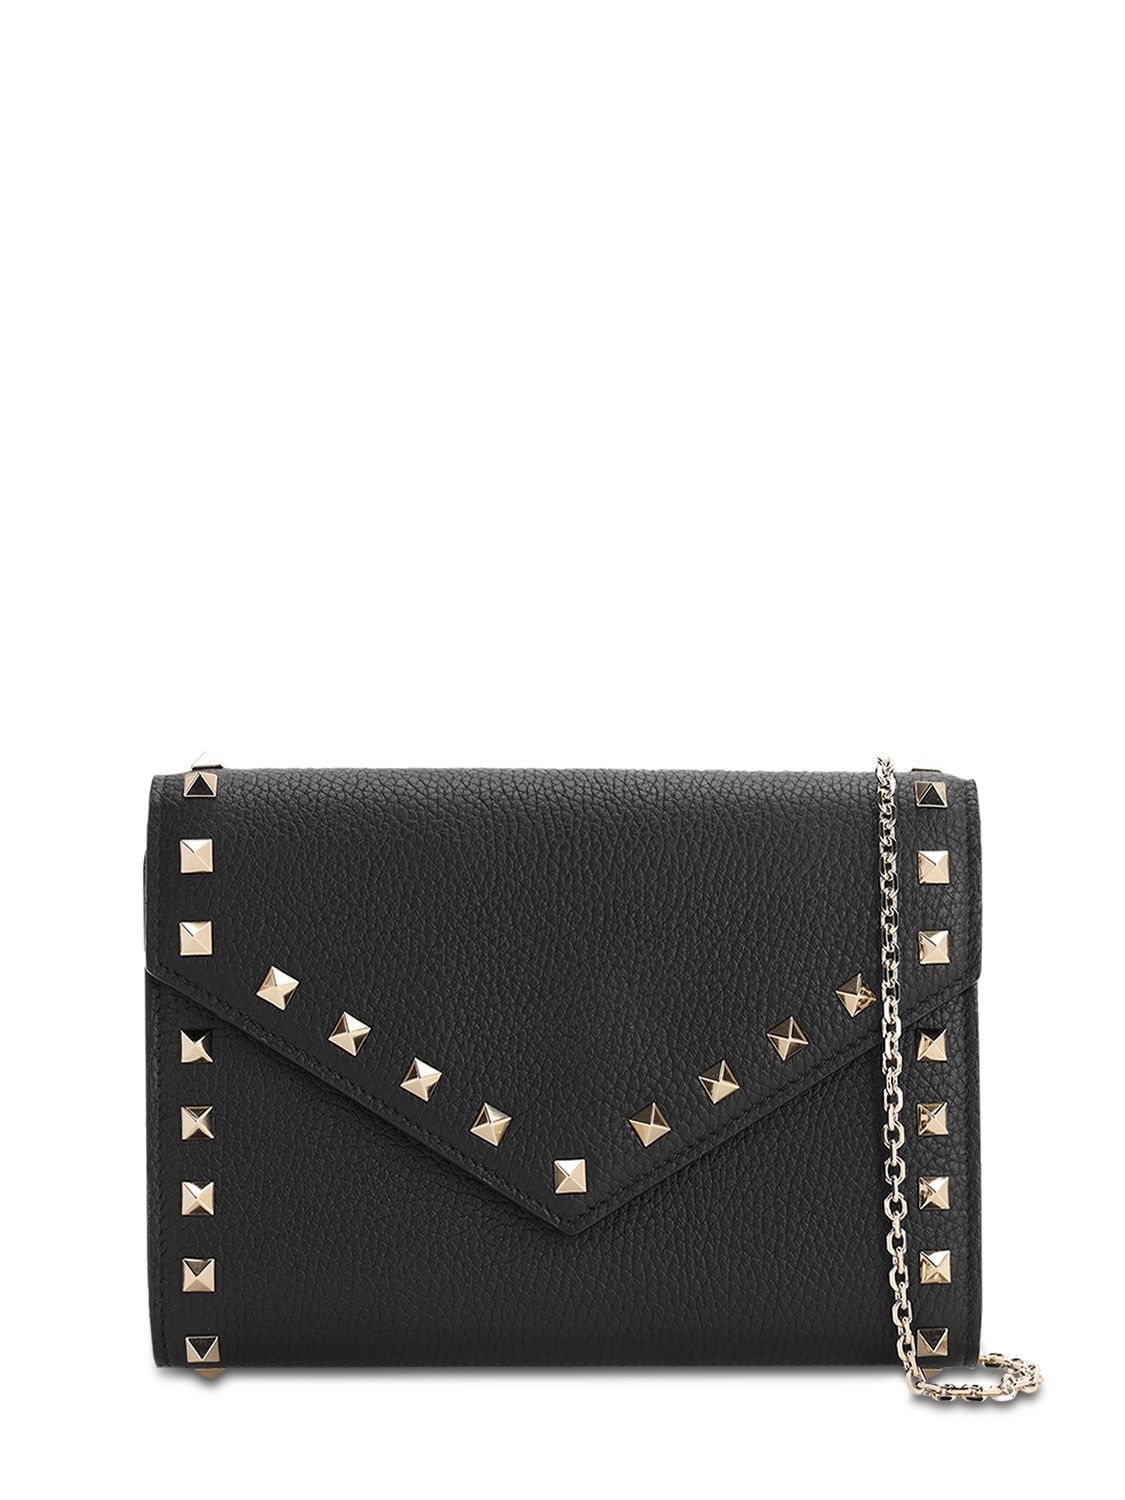 Valentino VSLING Grainy Leather Wallet on Chain - ShopStyle